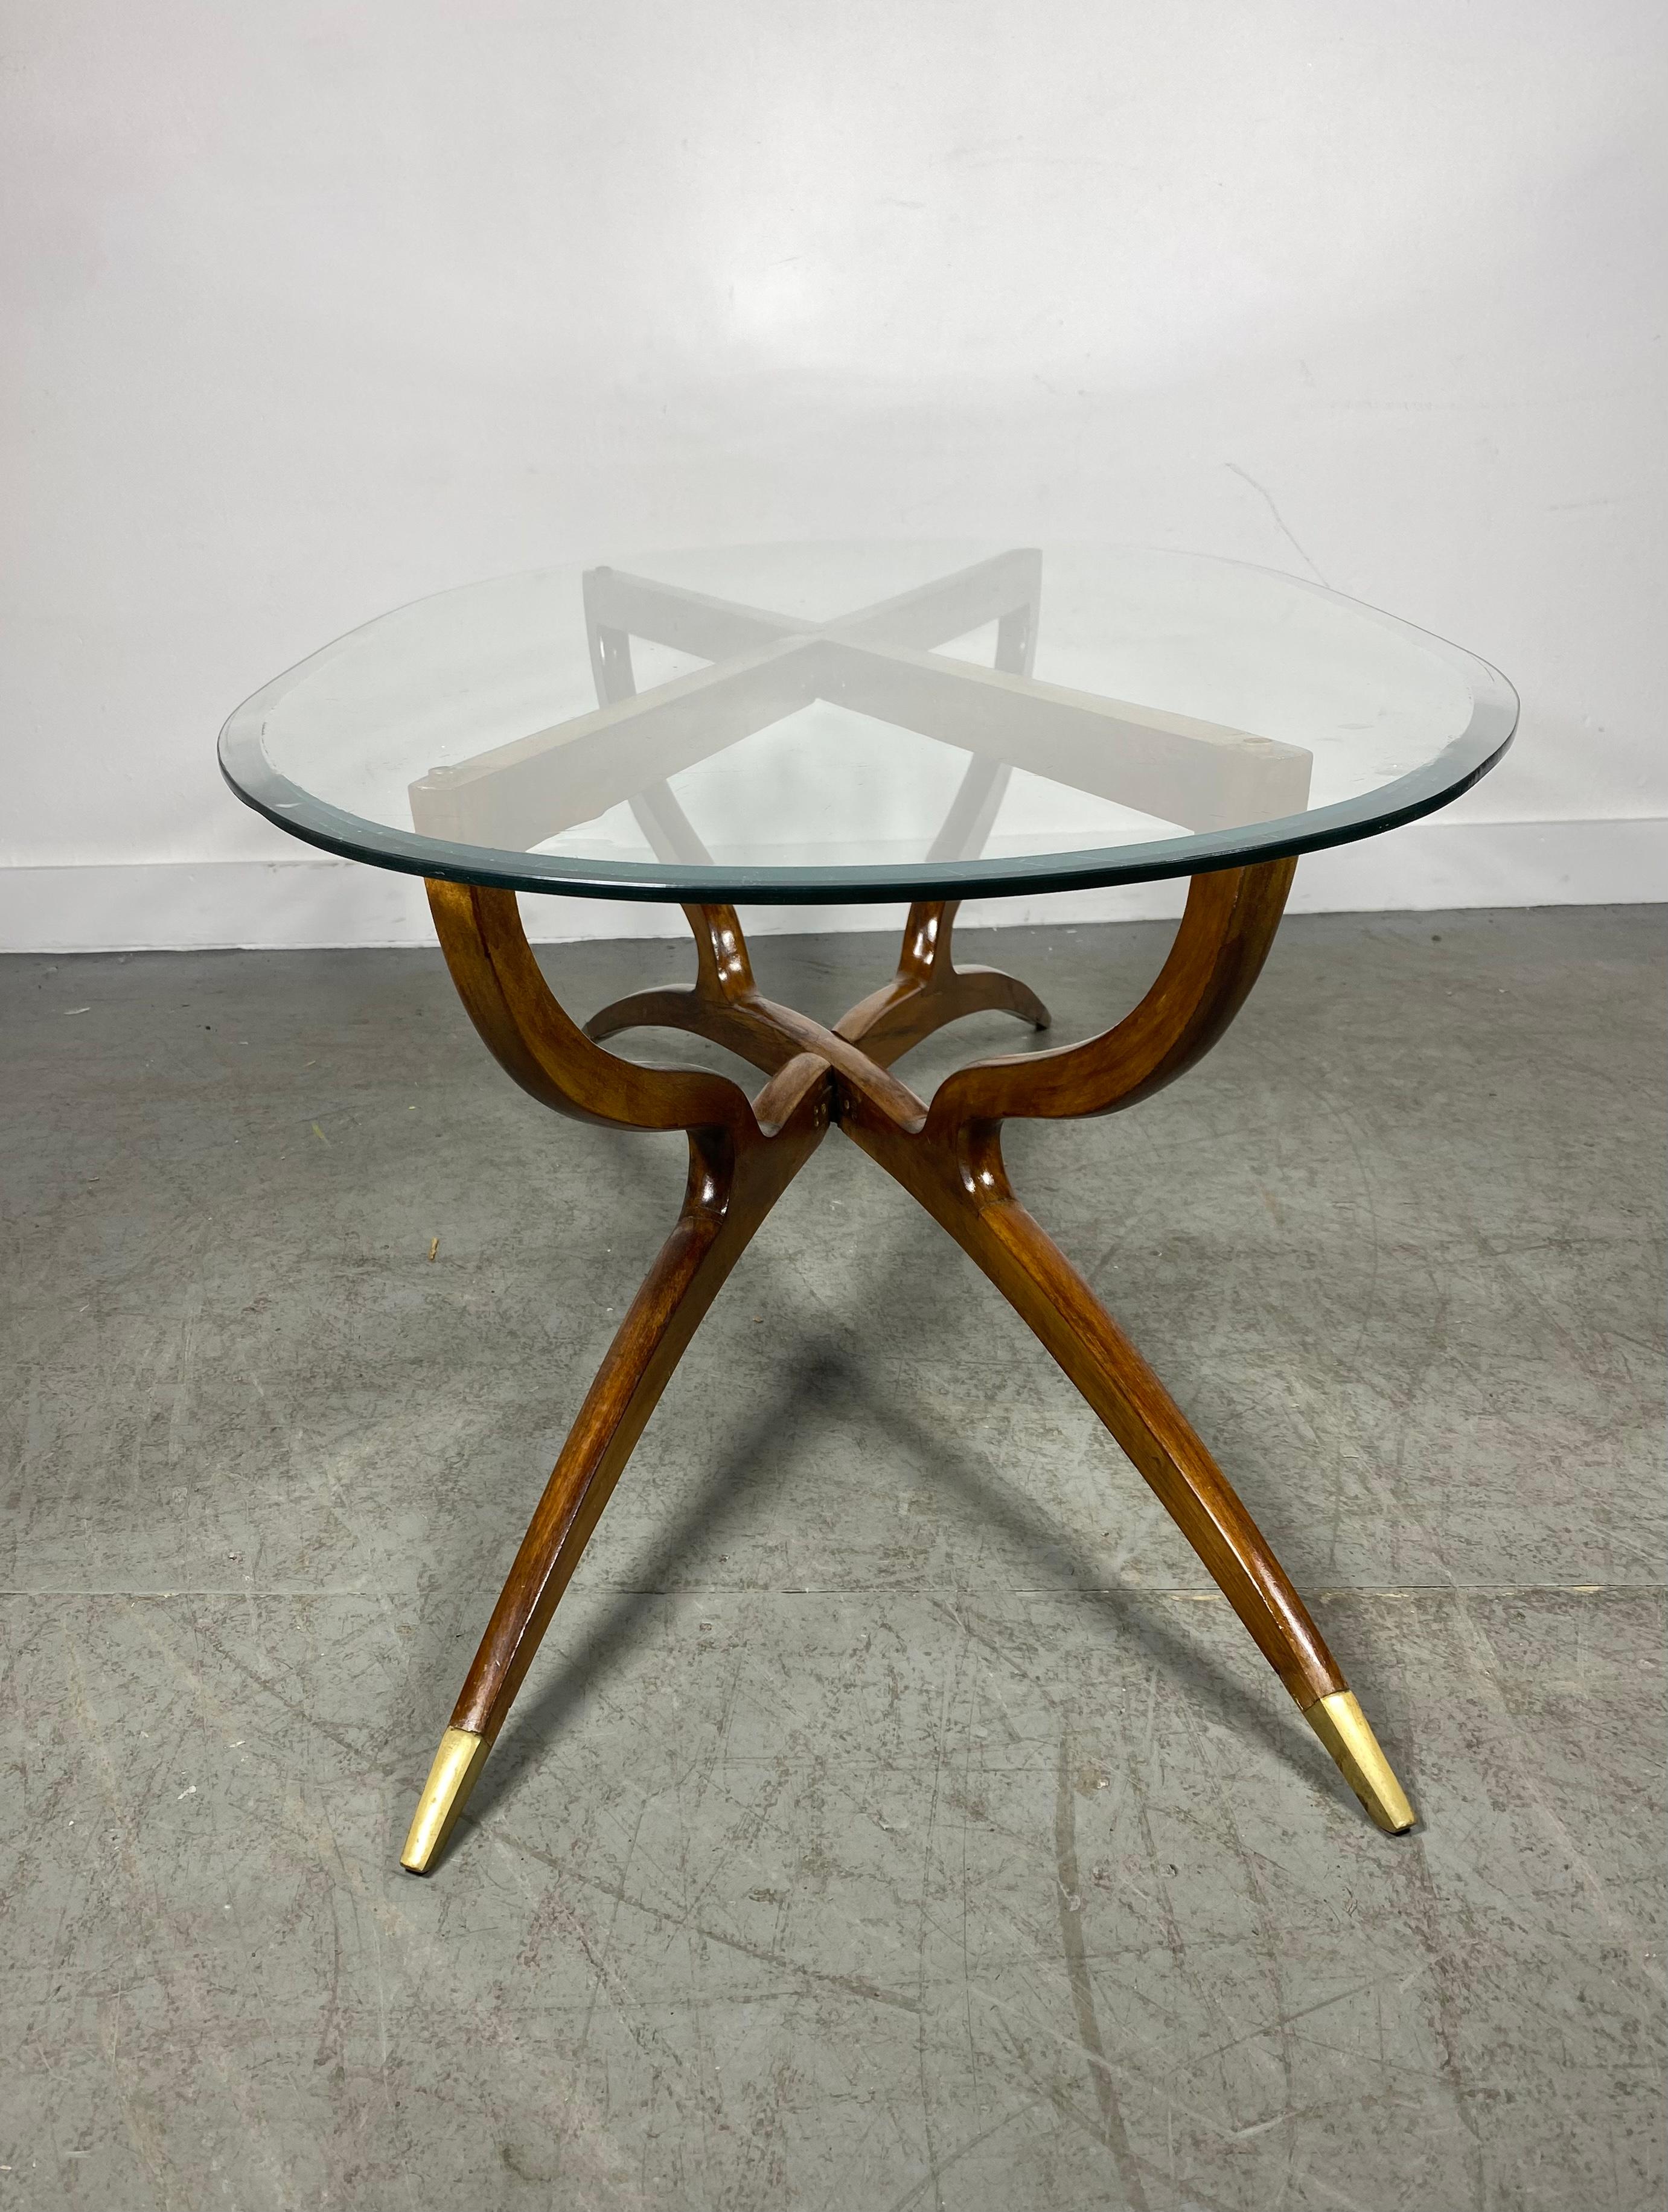 Stunning Mid-Century Modern Kagan Style Spider Leg Coffee/ Cocktail table, sculpted walnut. Beautiful beveled glass top, brass accents to feet (base).